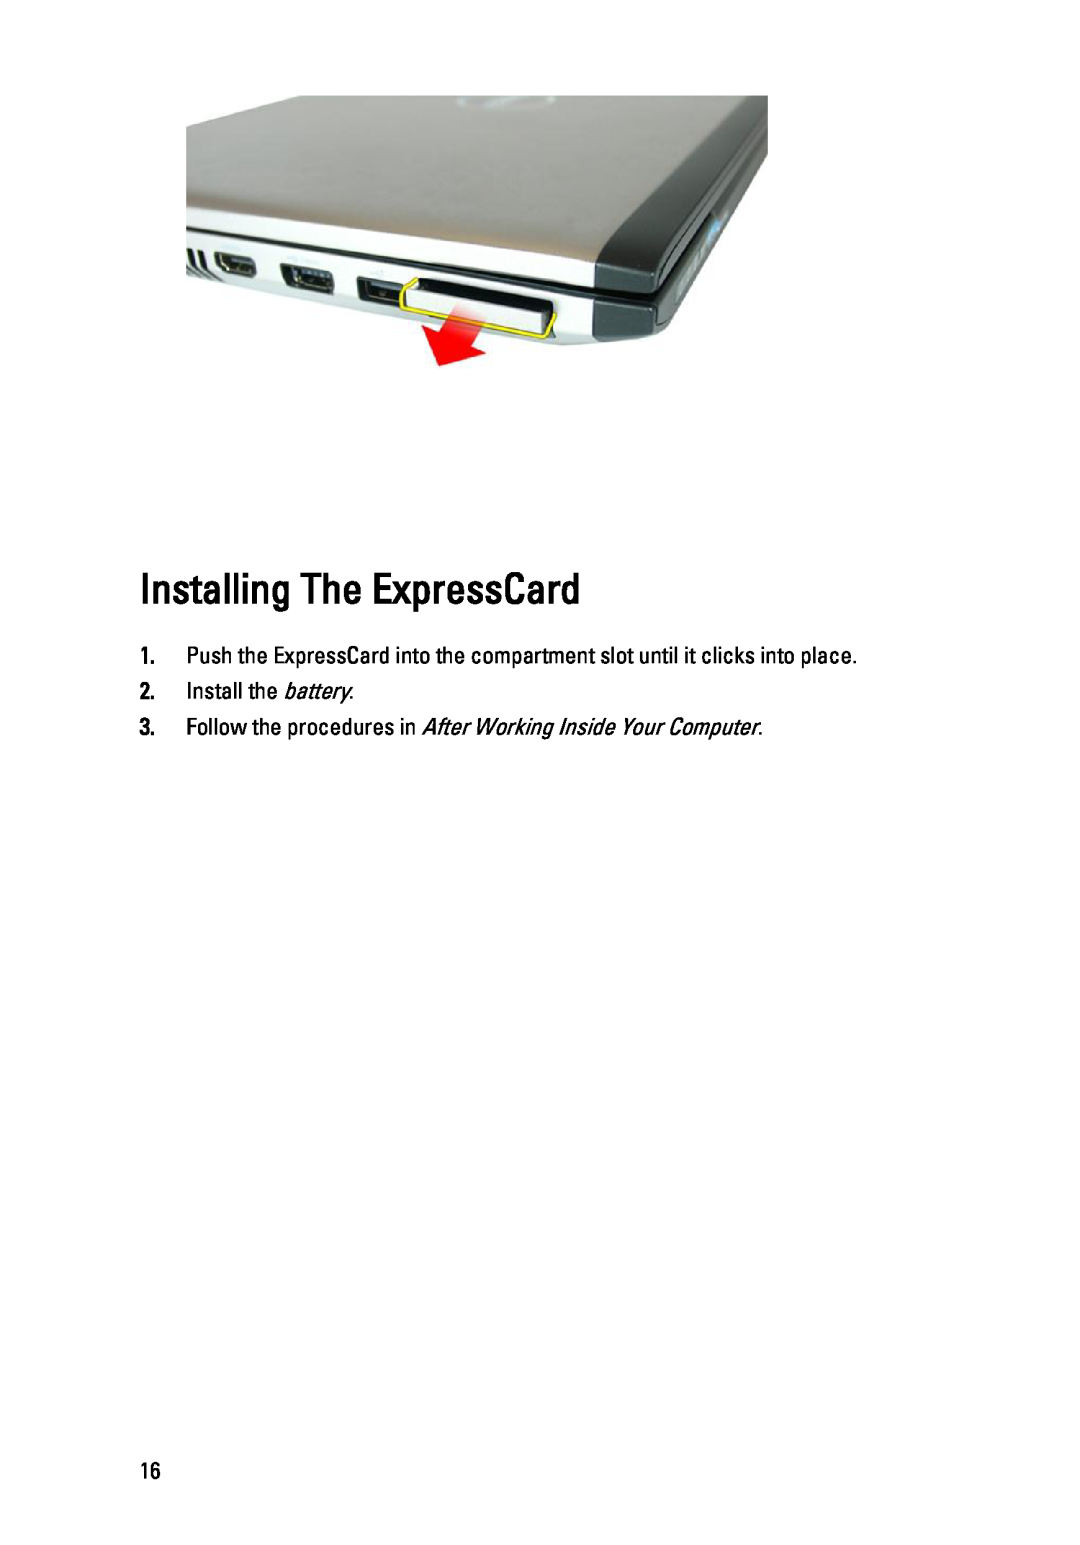 Dell 3450 Installing The ExpressCard, Install the battery, Follow the procedures in After Working Inside Your Computer 